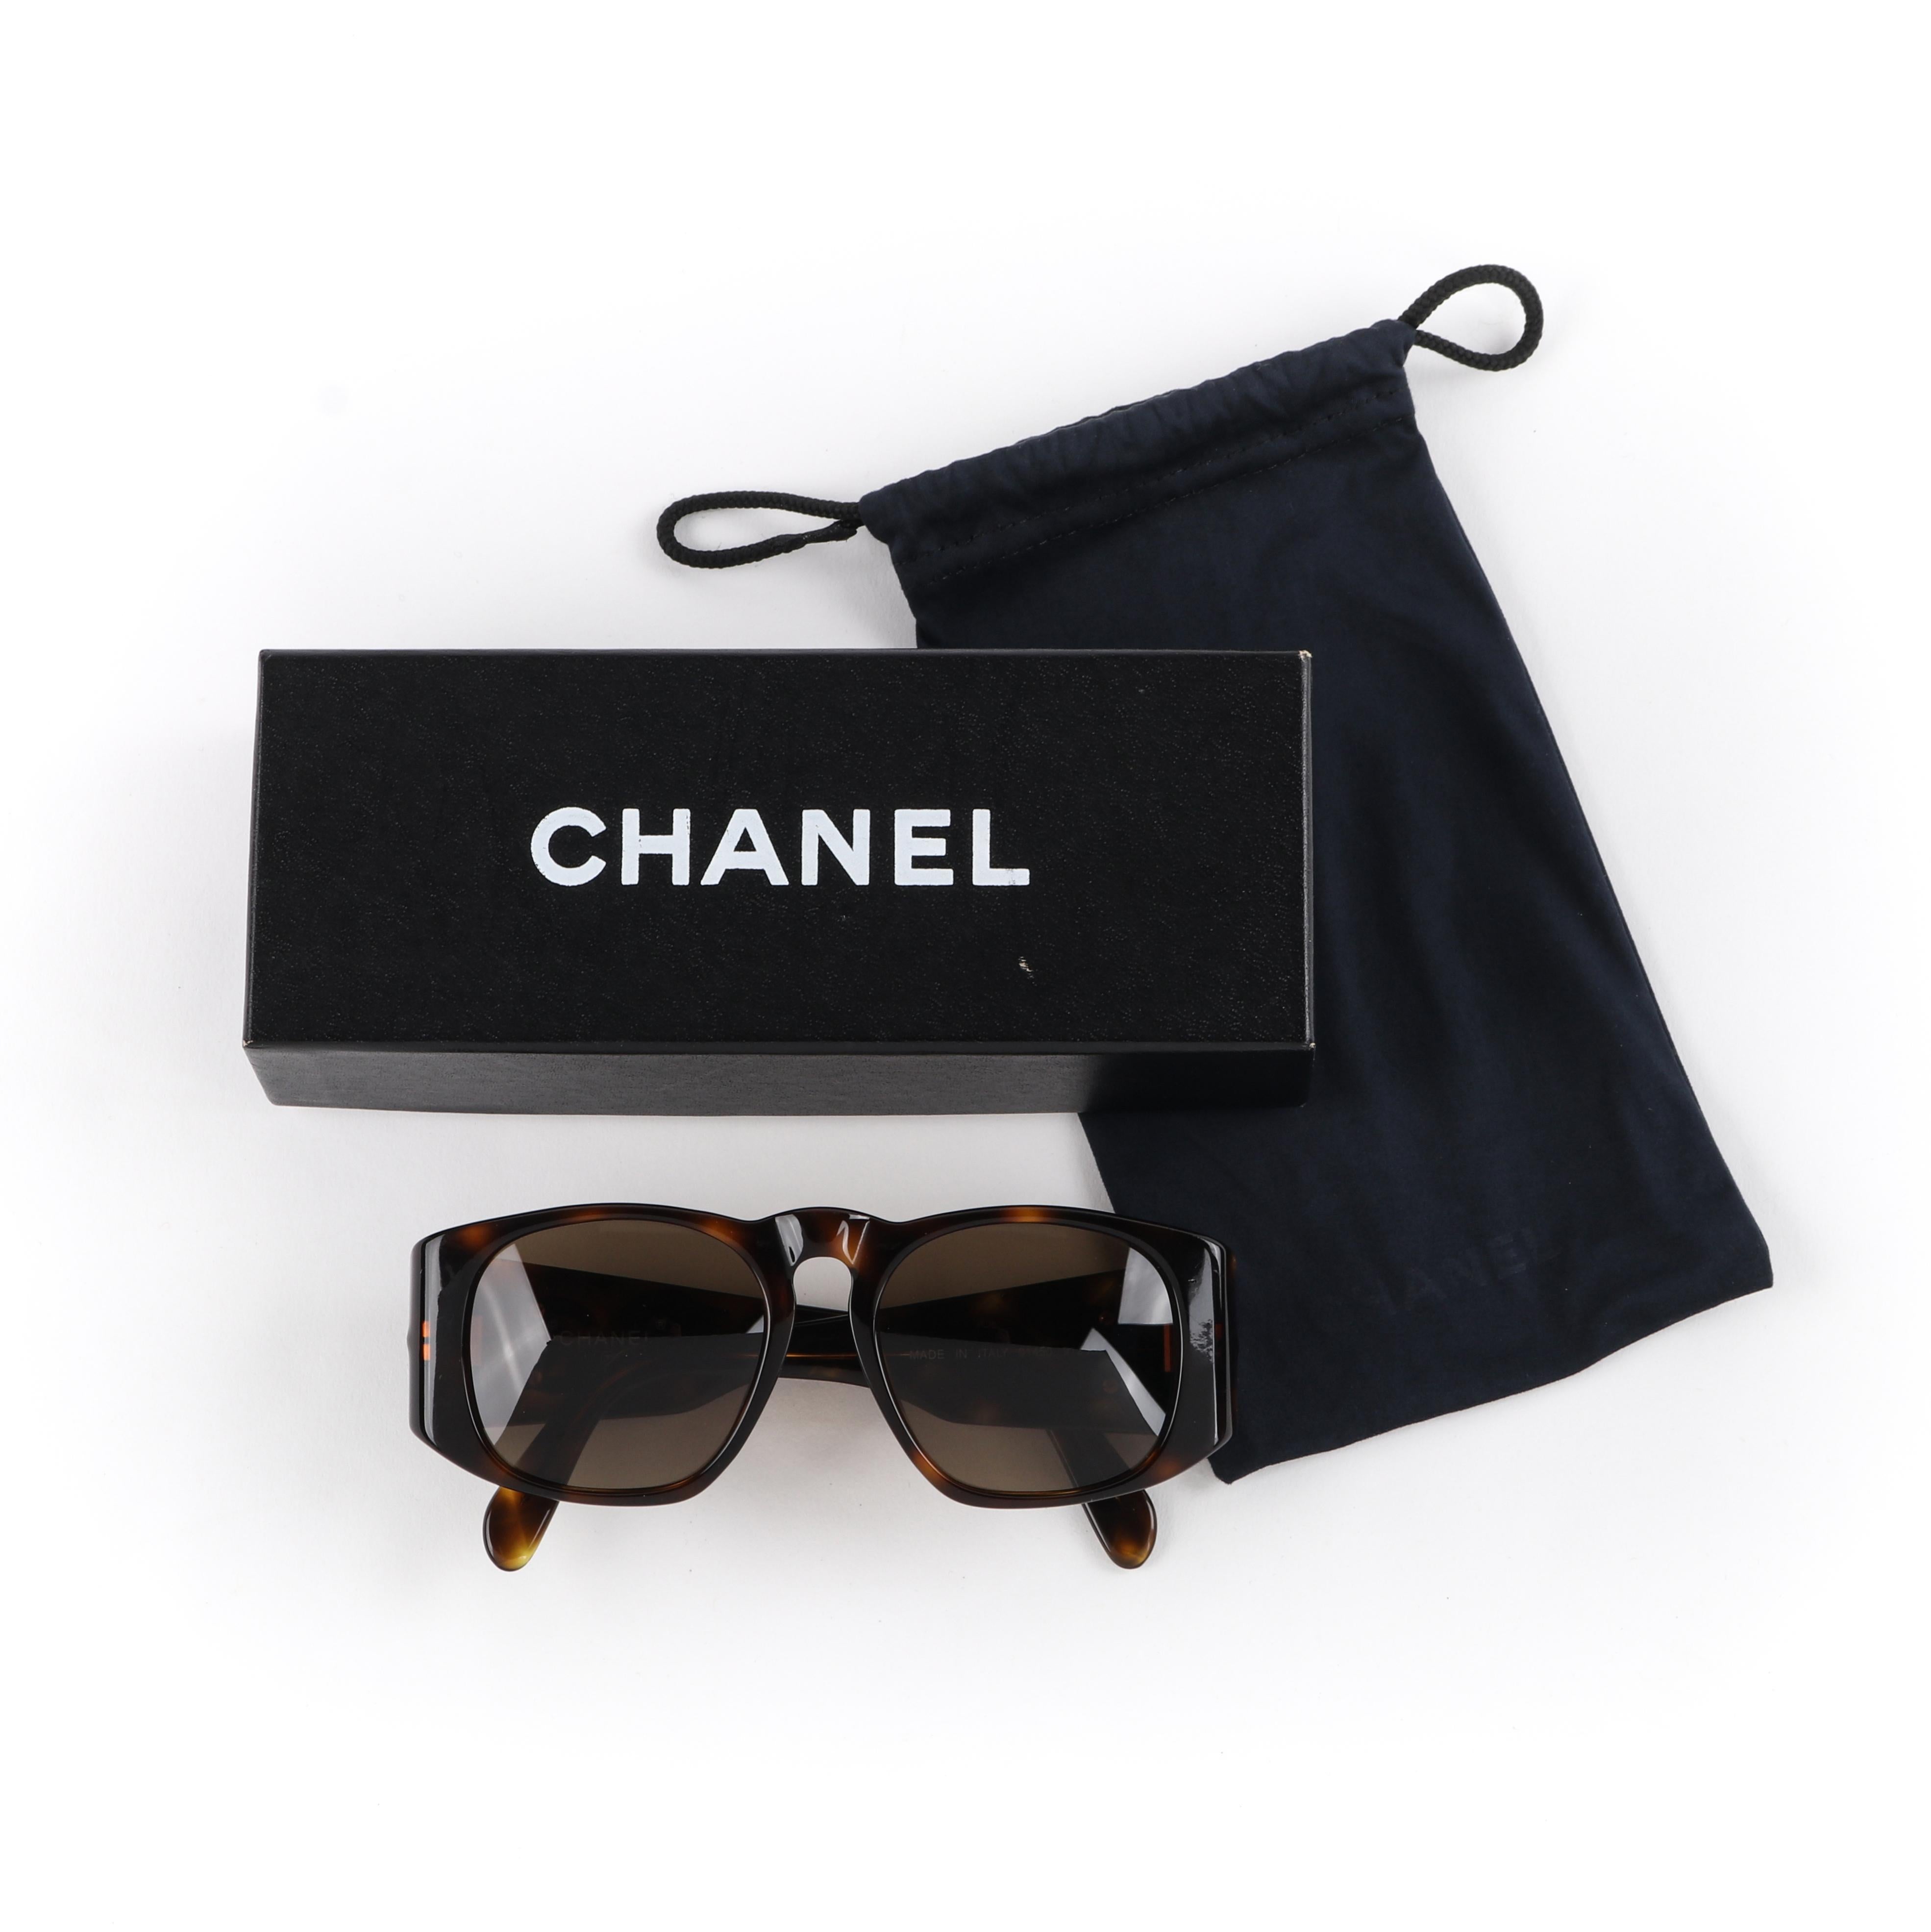 CHANEL c.1980’s Brown Tortoiseshell Quilted Gold CC Logo Sunglasses 01450 w/Box
 
Brand/Manufacturer: Chanel
Circa: 1980’s
Style: Oversized sunglasses
Lined: No
Color(s): Shades of brown, yellow
Unmarked Fabric Content (feel of): Frame: Plastic;